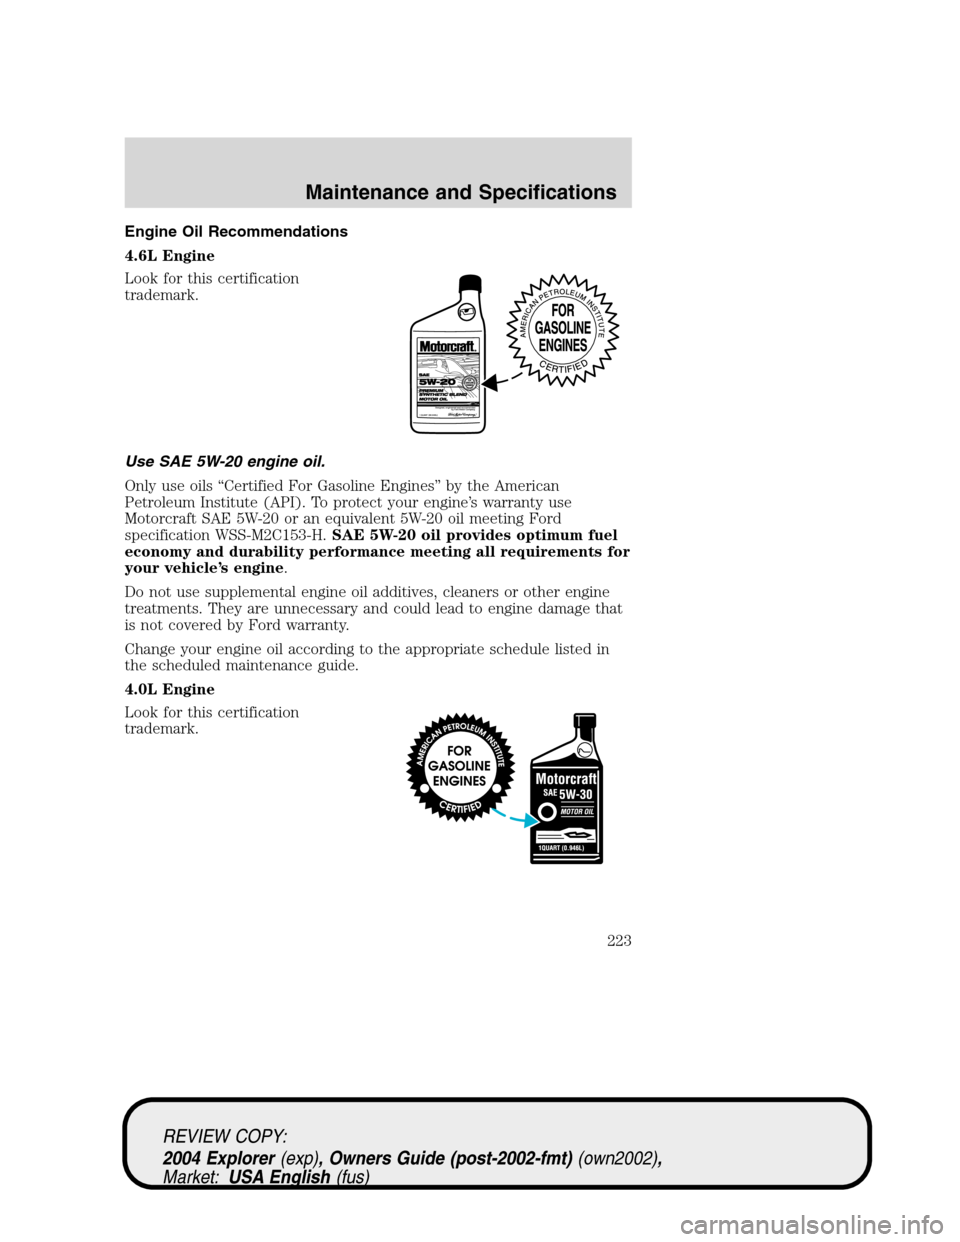 Mercury Mountaineer 2004  Owners Manuals Engine Oil Recommendations
4.6L Engine
Look for this certification
trademark.
Use SAE 5W-20 engine oil.
Only use oils “Certified For Gasoline Engines” by the American
Petroleum Institute (API). To